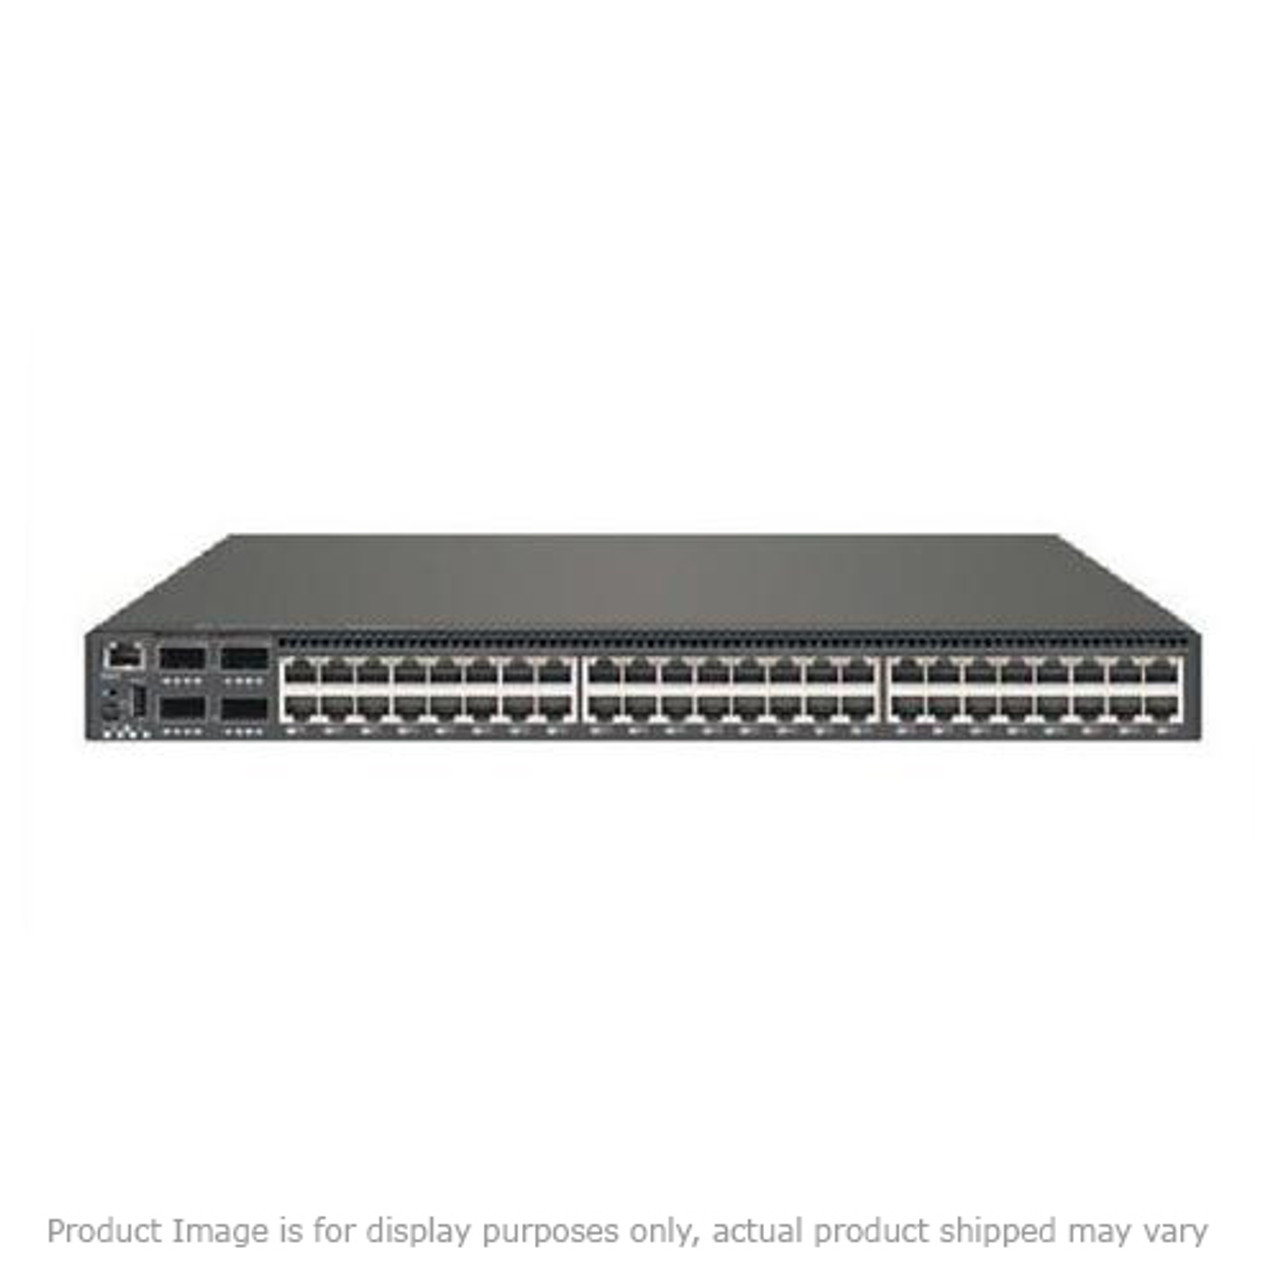 OS6124 Alcatel-Lucent Omnistack 6124 24 Port 10/100 Switch With Management Module (Refurbished)